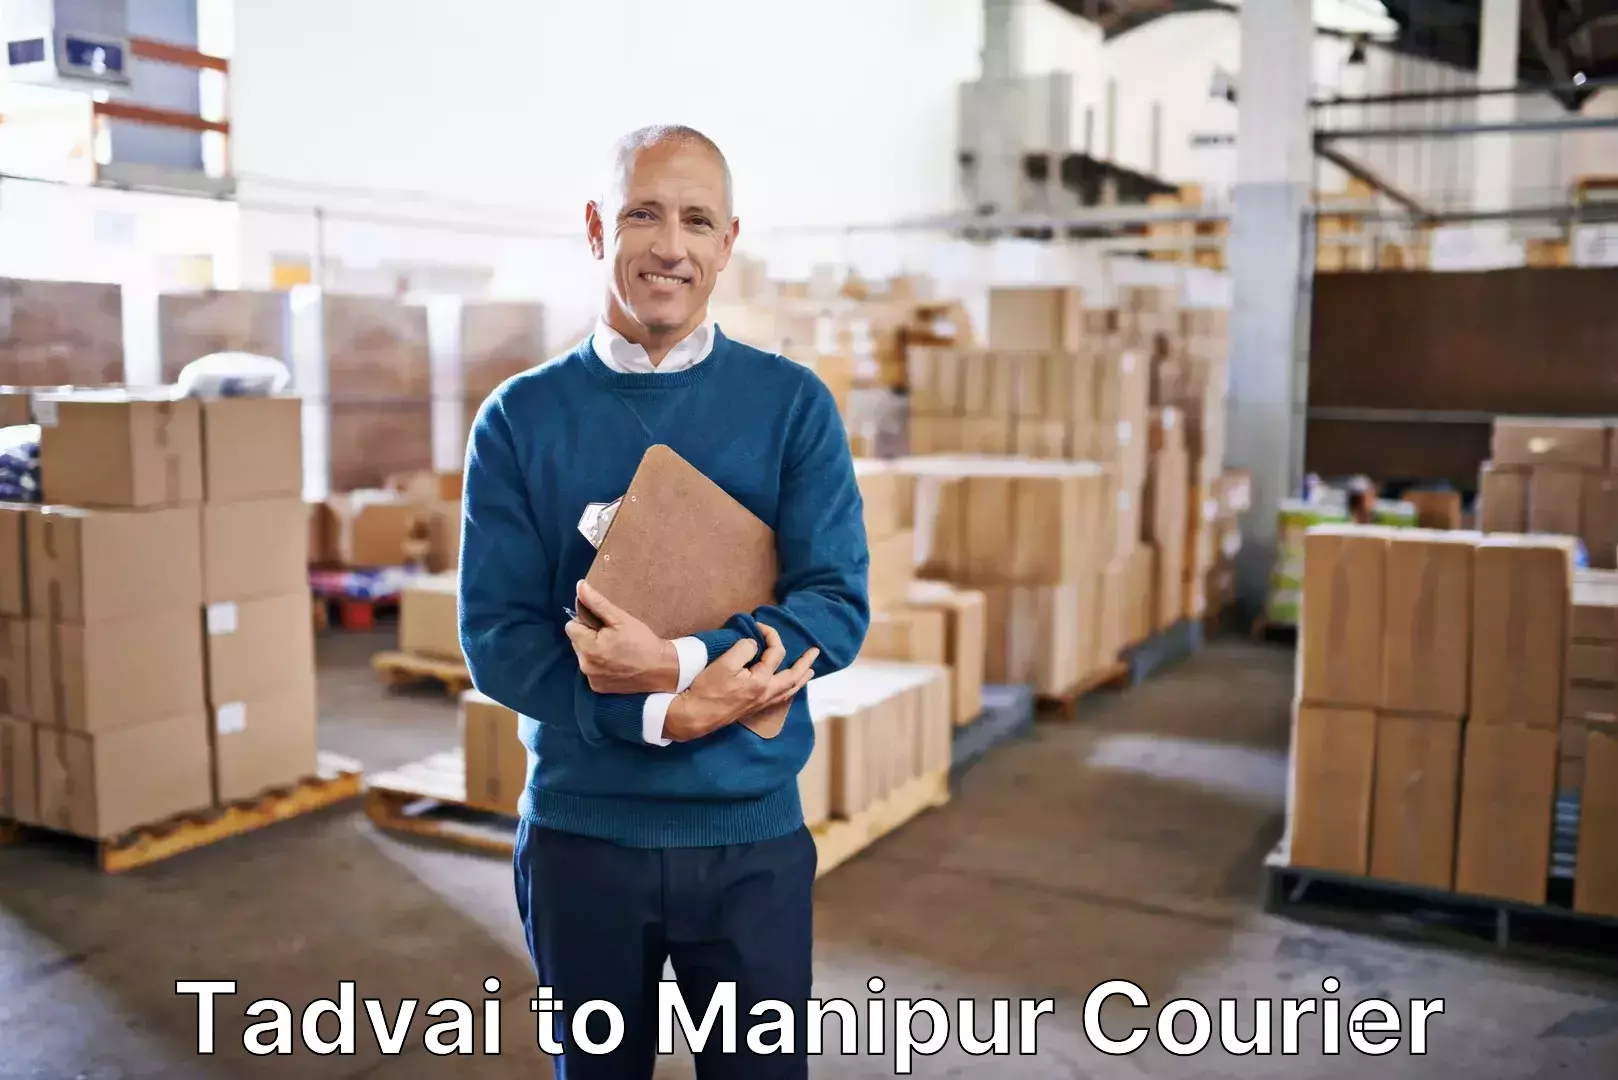 Luggage transport consulting Tadvai to Manipur